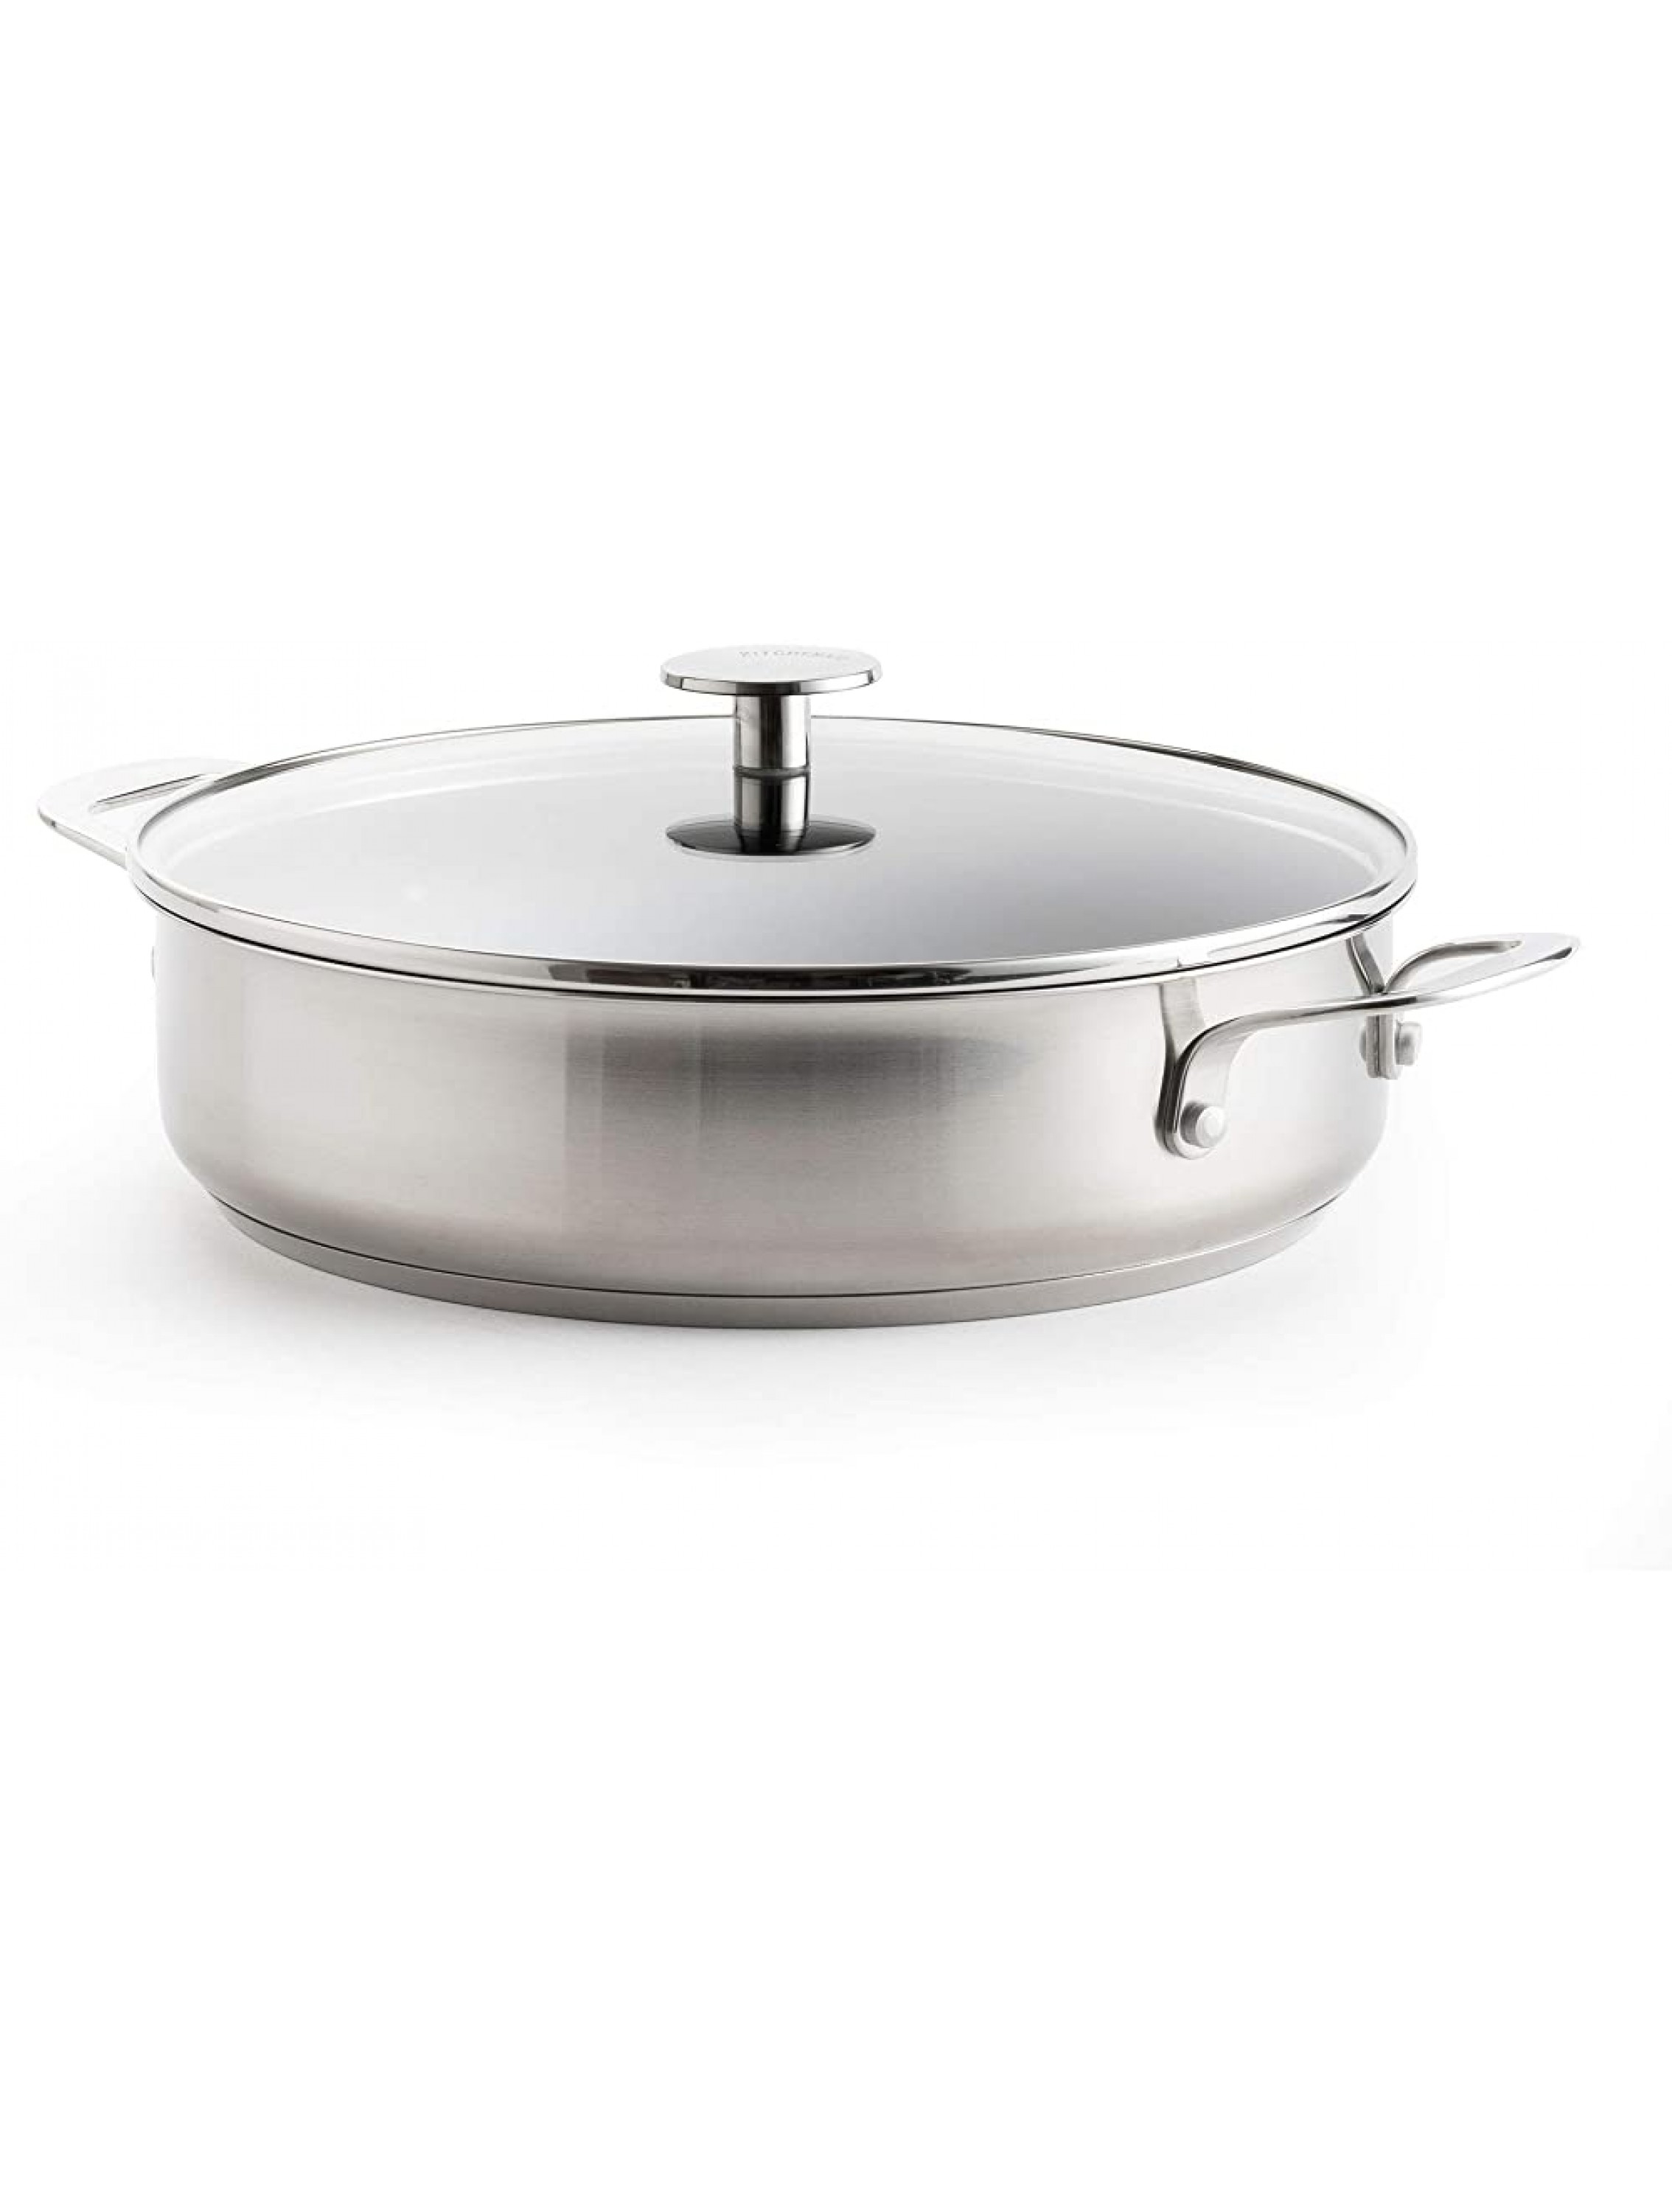 KitchenAid Skillet with 2 Side Handles and Lid Non Stick Stainless Steel Skillet Induction and Oven Safe Cookware 28 cm 4.3 Litres - BOB810I3E